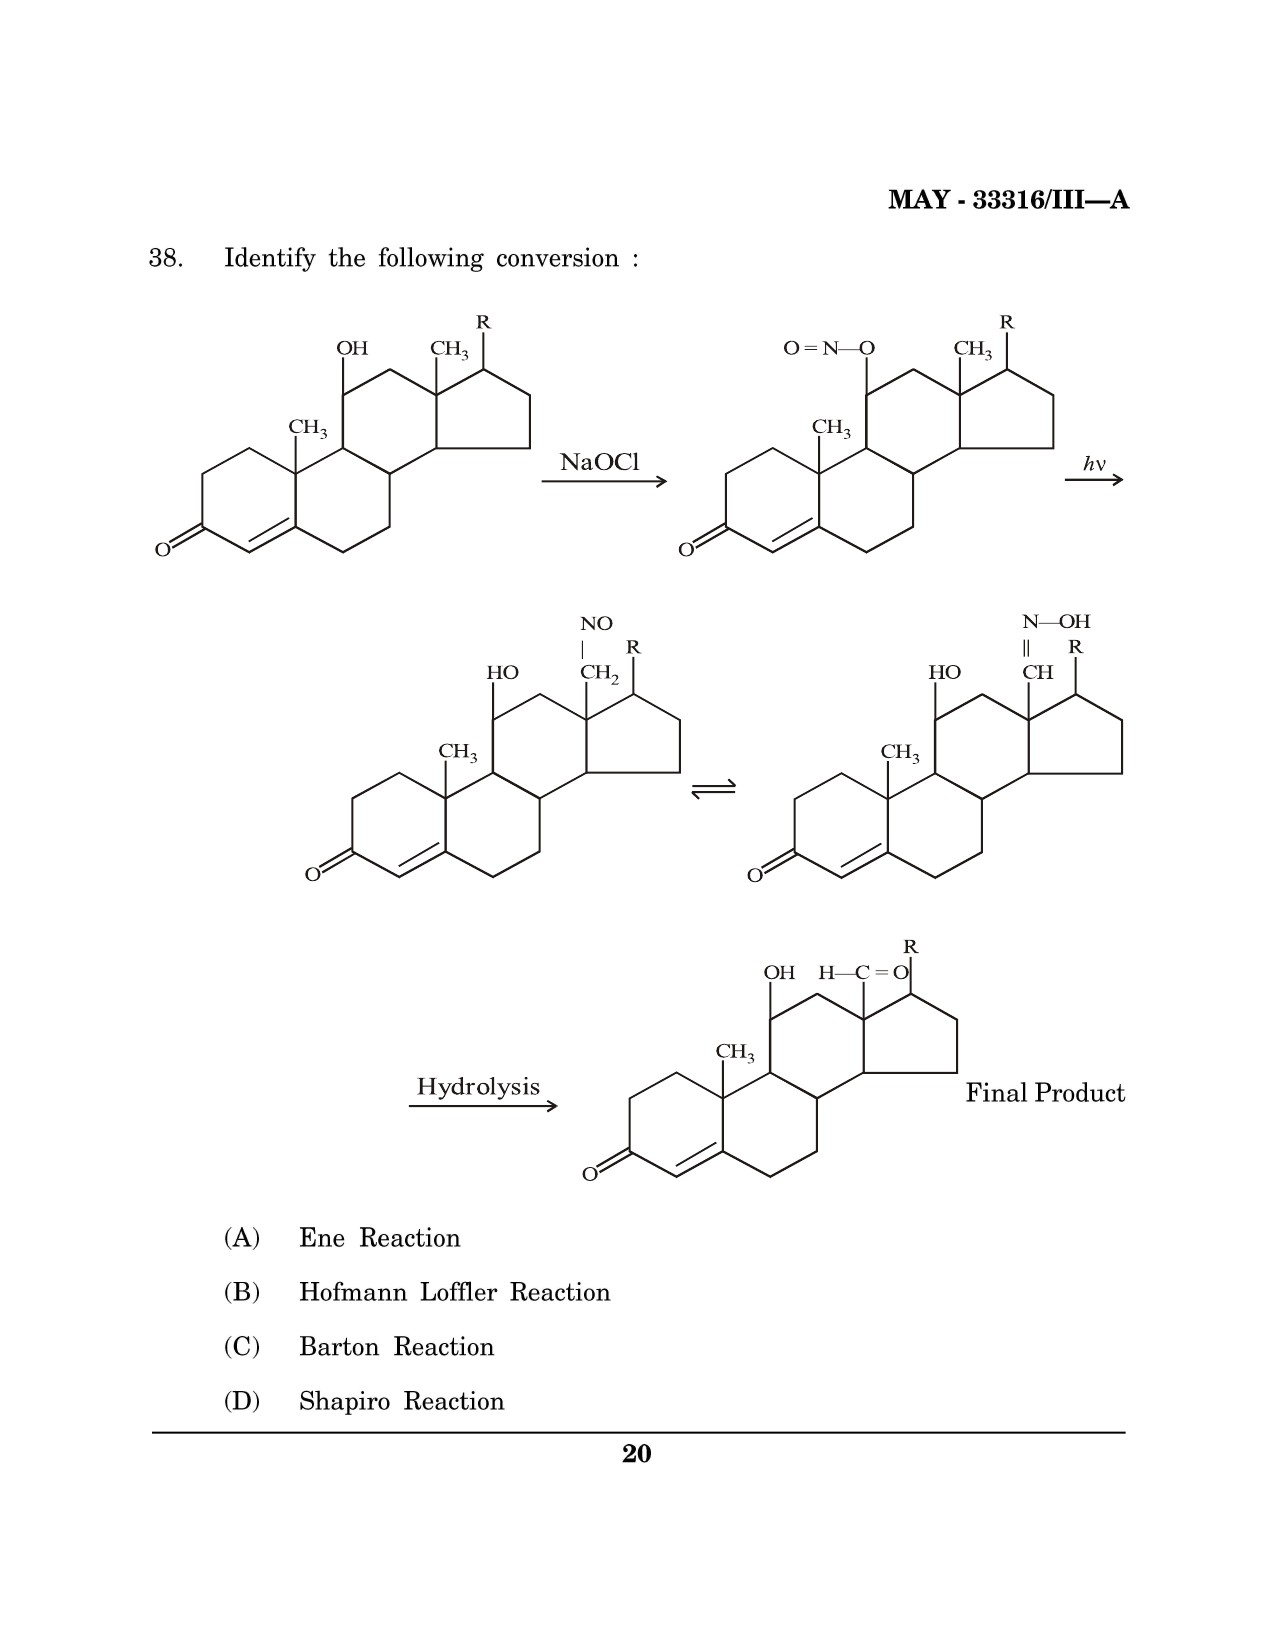 Maharashtra SET Chemical Sciences Question Paper III May 2016 19